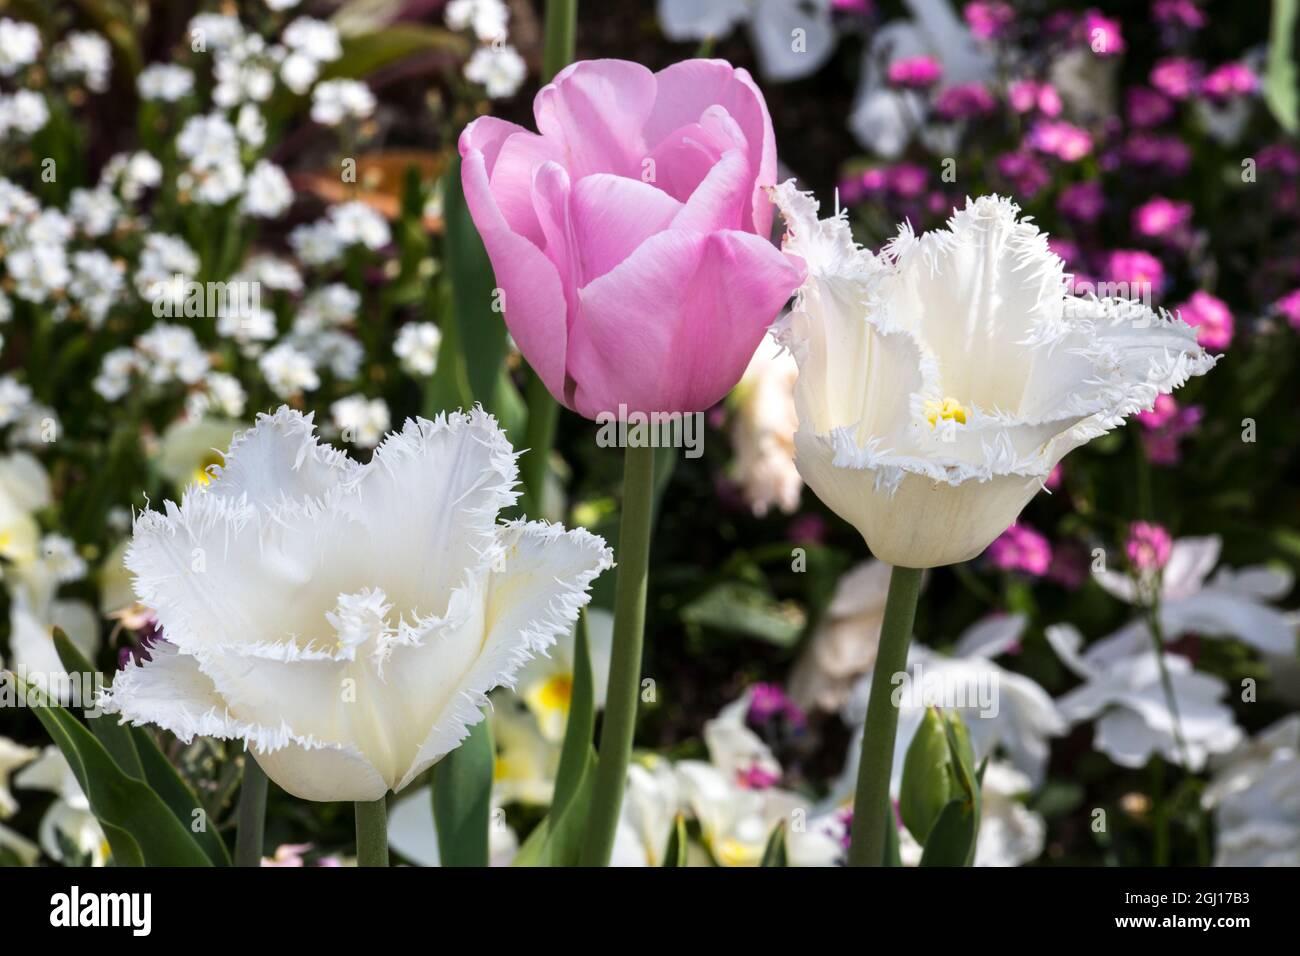 Germany, Freinsheim, Flowers (Two Whites and a Pink) Stock Photo